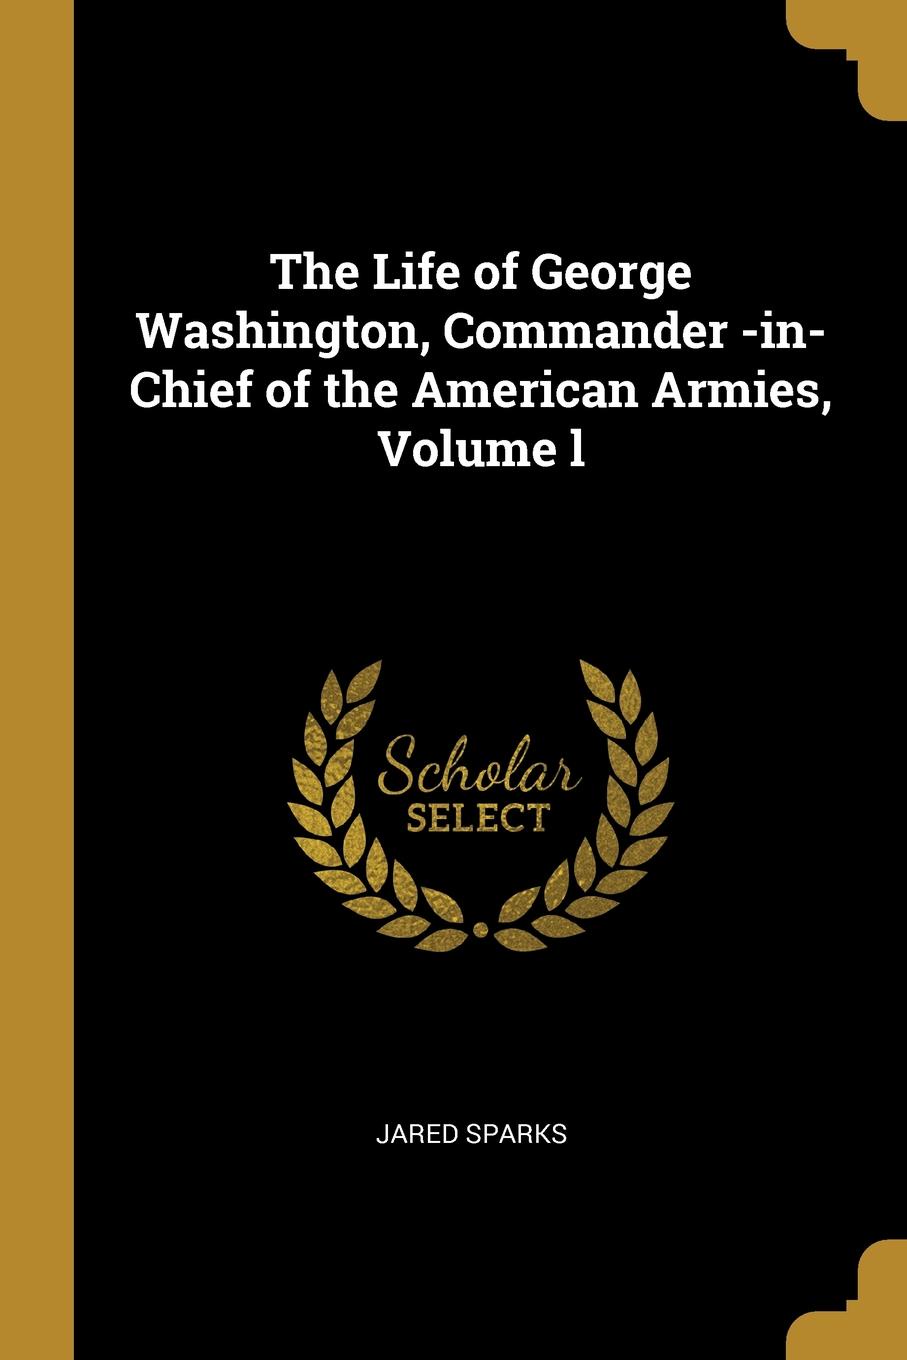 The Life of George Washington, Commander -in-Chief of the American Armies, Volume l